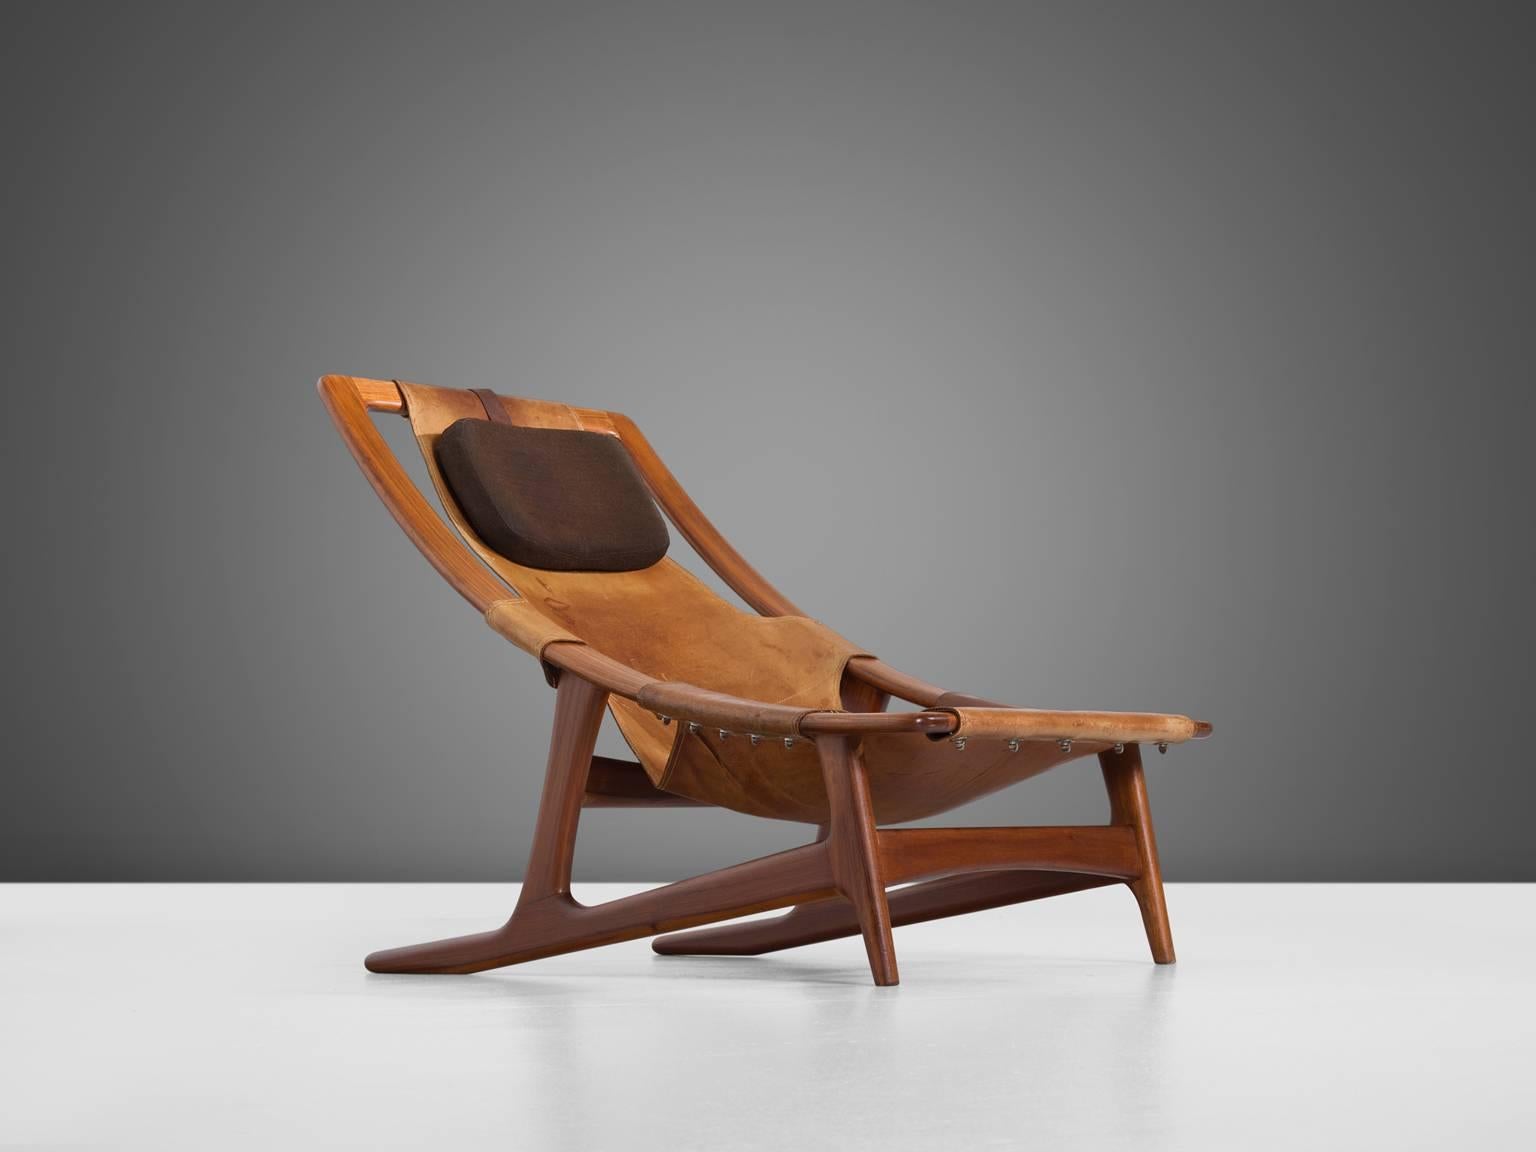 Arne F. Tidemand Ruud for Norcraft, lounge chair 'Holmenkollen,' teak and cognac leather, by Norway, 1959. 

This easy chair is designed by Norwegian designer Arne F. Tidemand Ruud. This chair is very dynamic due it's design and shapes. The bended